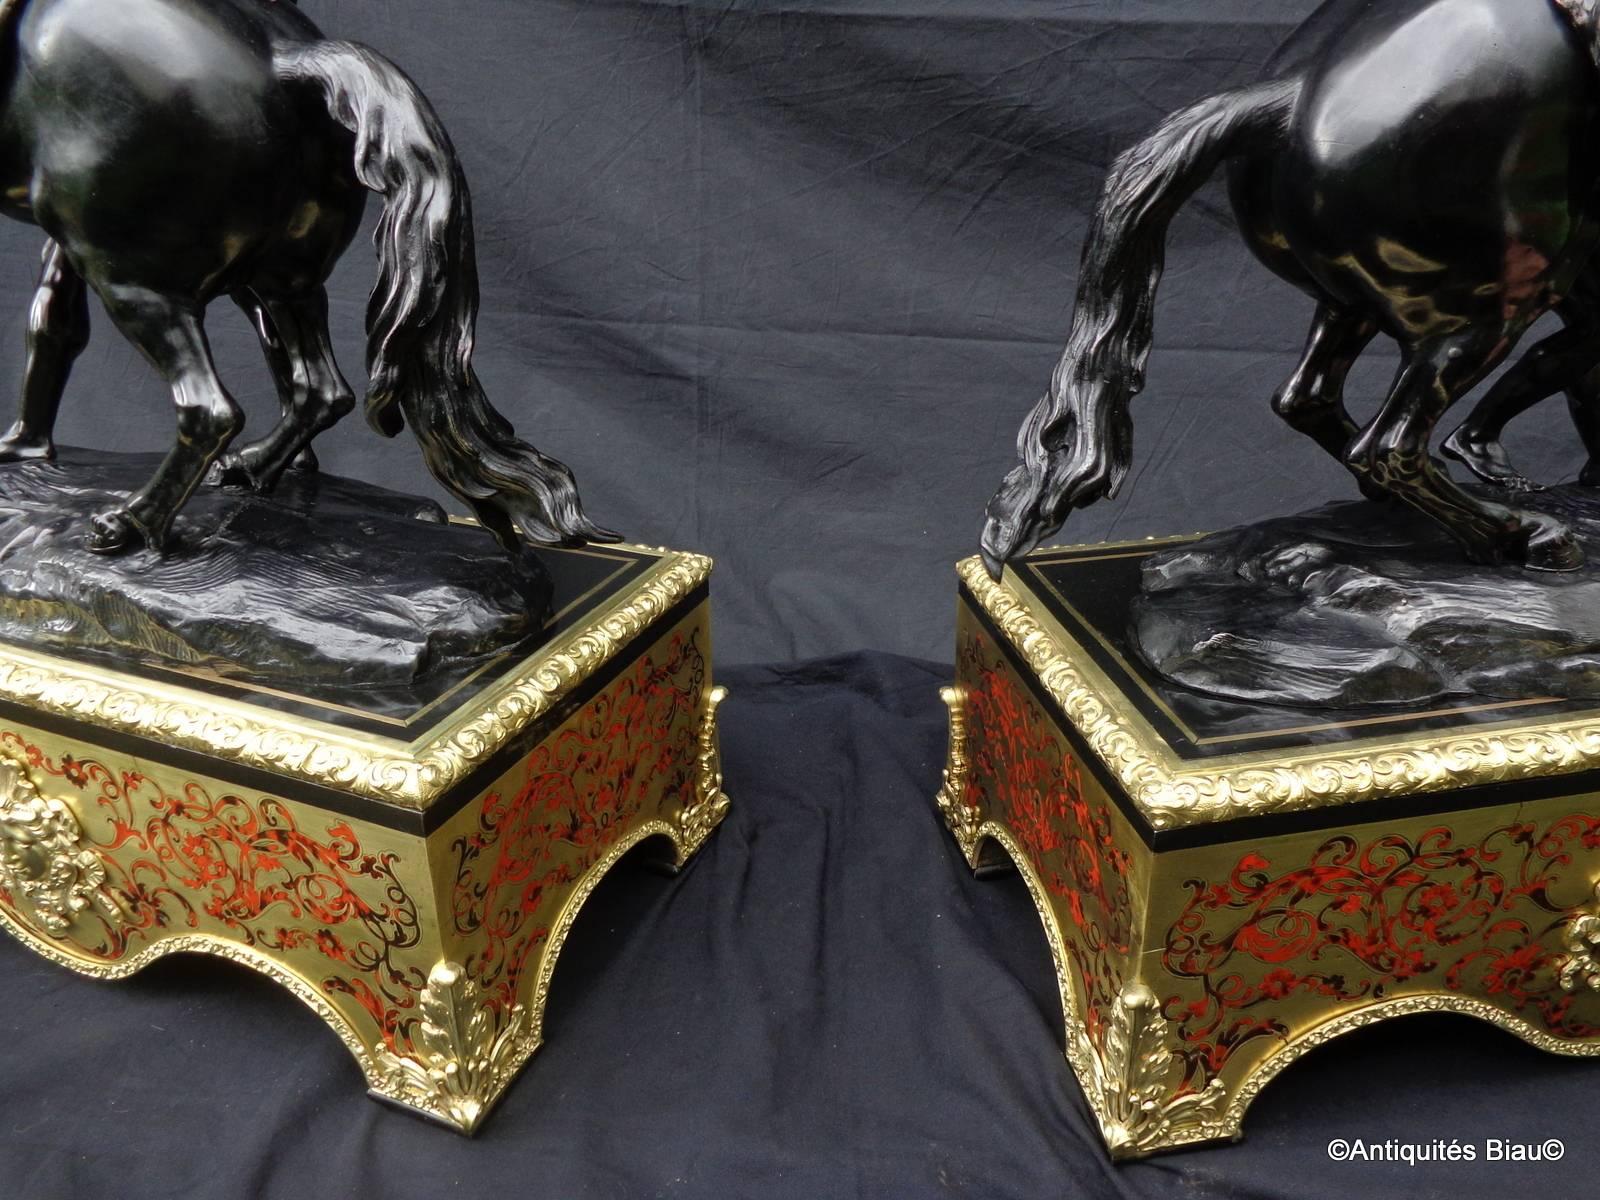 Spectacular and rare pair of Marly Horses on their pedestal Boulle marquetry,
19th century.
 
The color is superb: Black medal.
 
A true pair of the exceptionally fine, of quality and detail.
 
bronzes are numbered 1 and 2.
 

Measures: